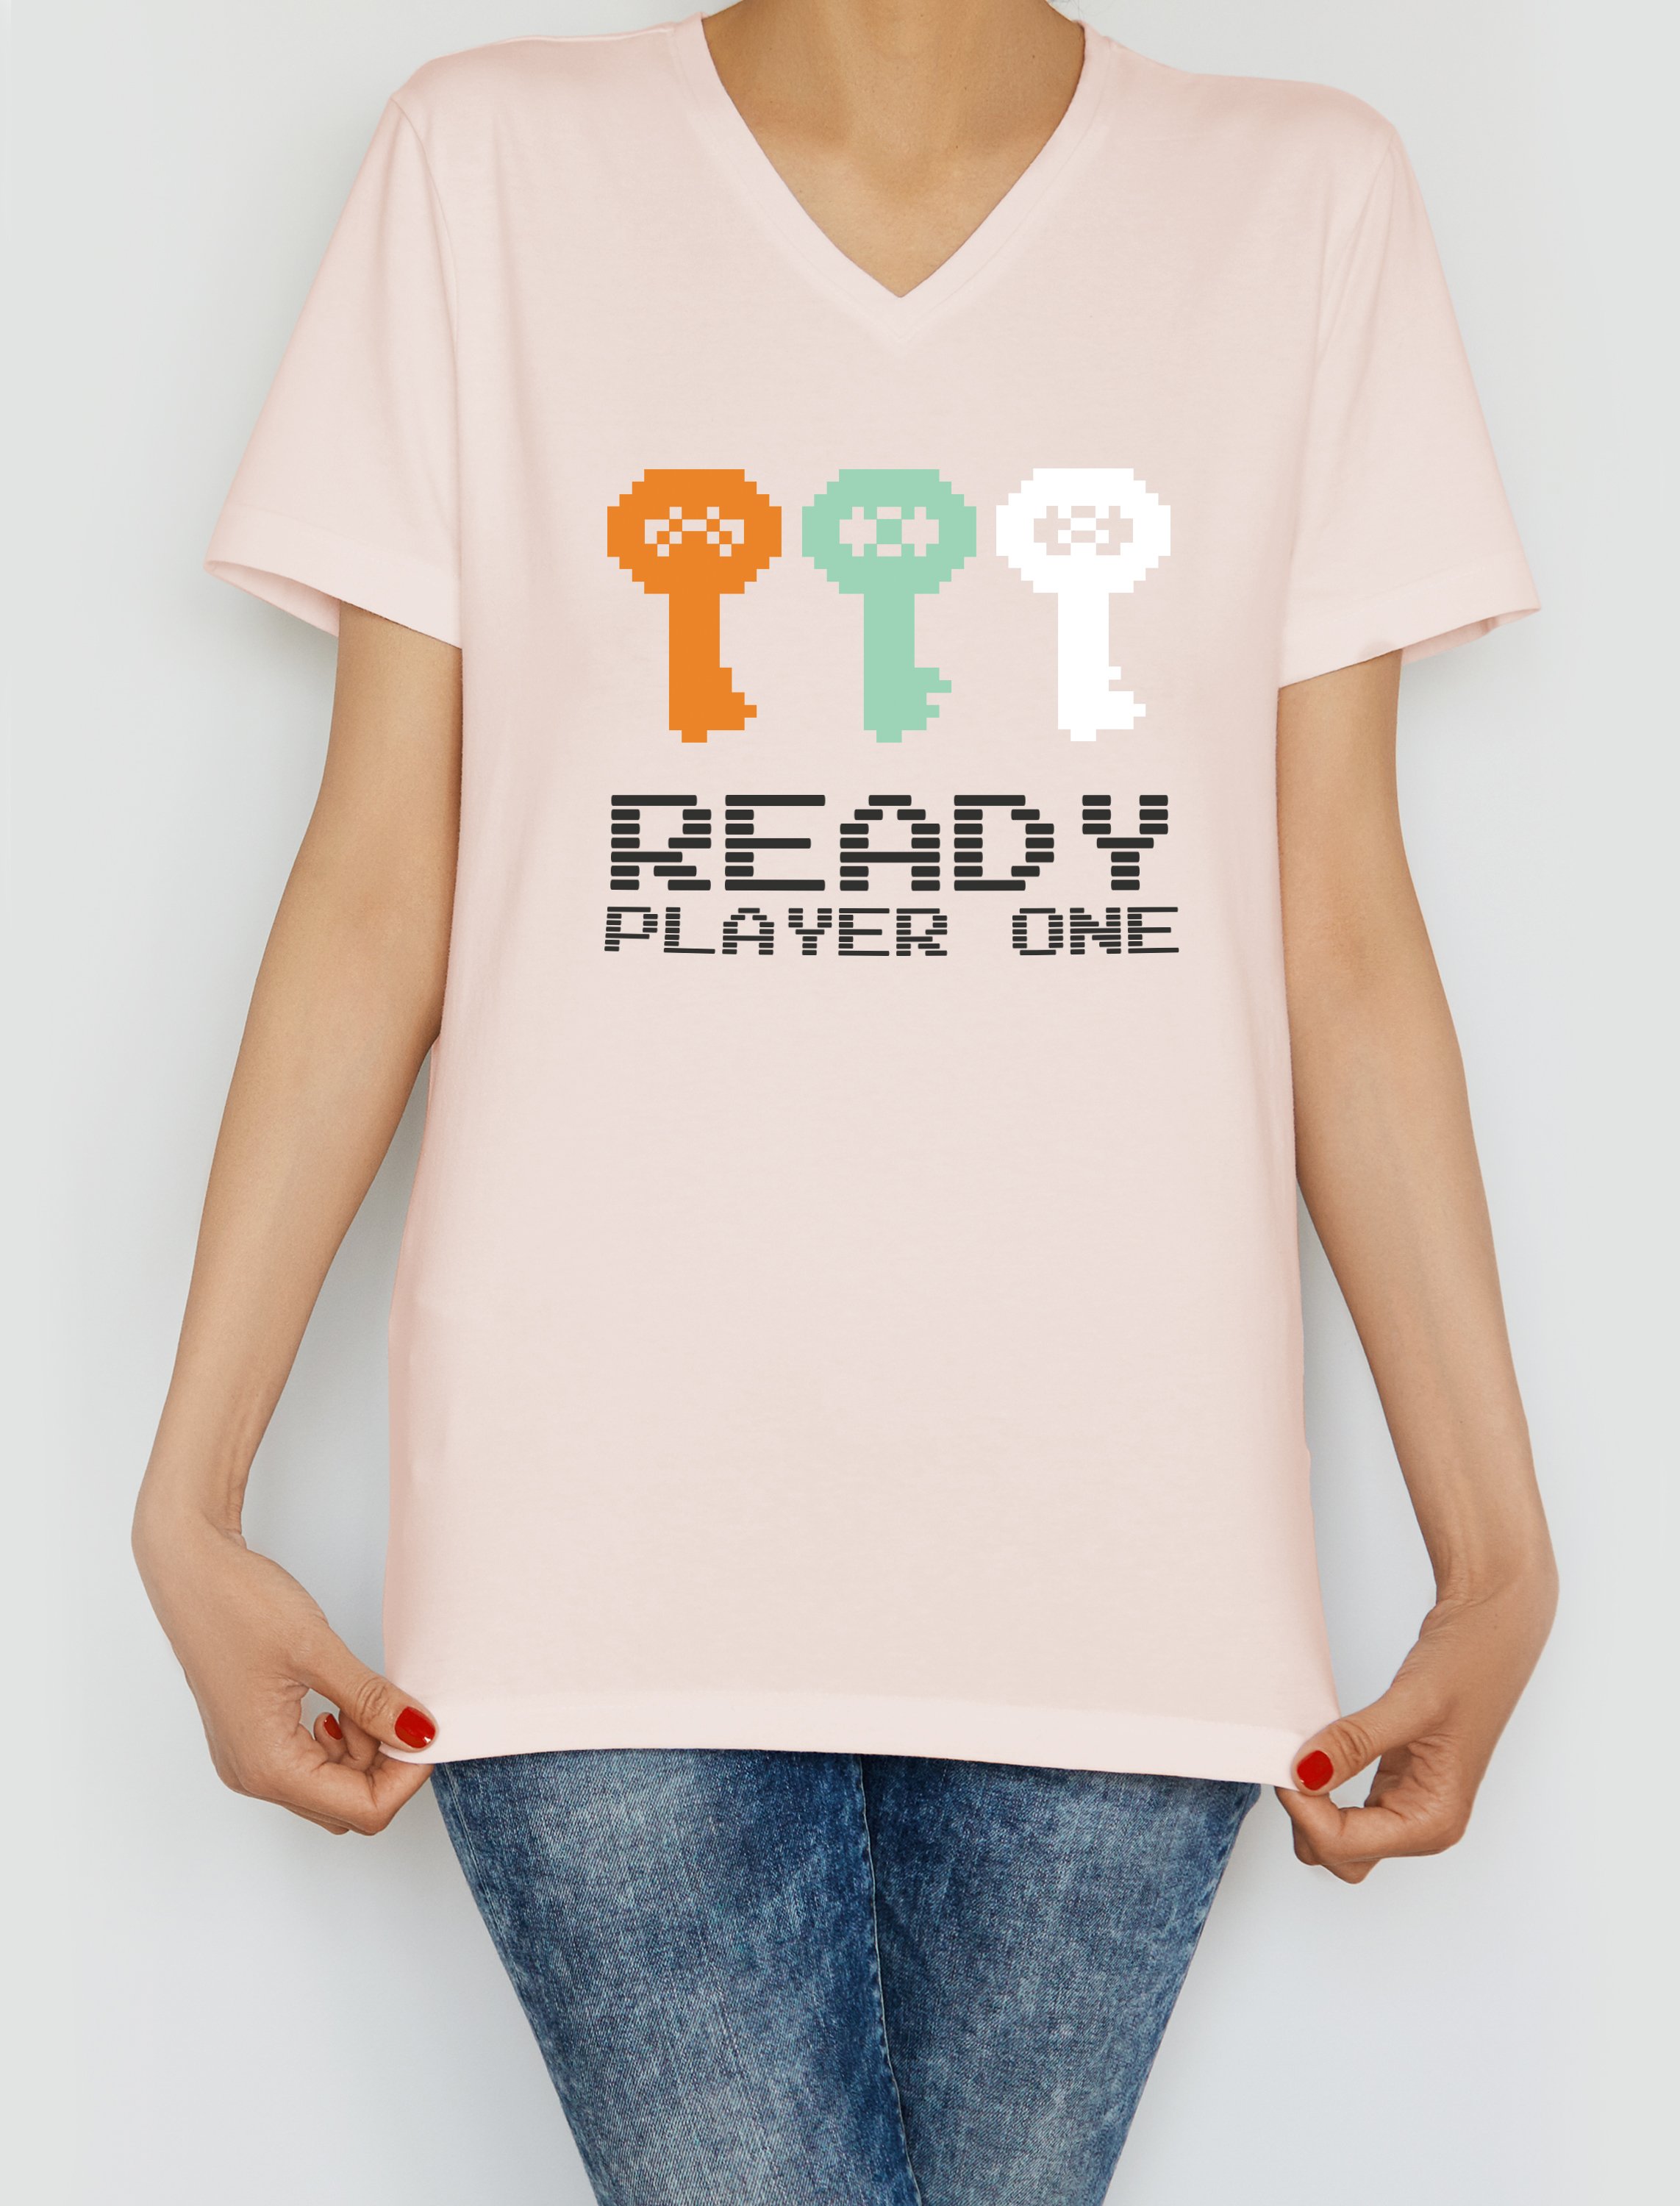 ready player one cut file on shirt